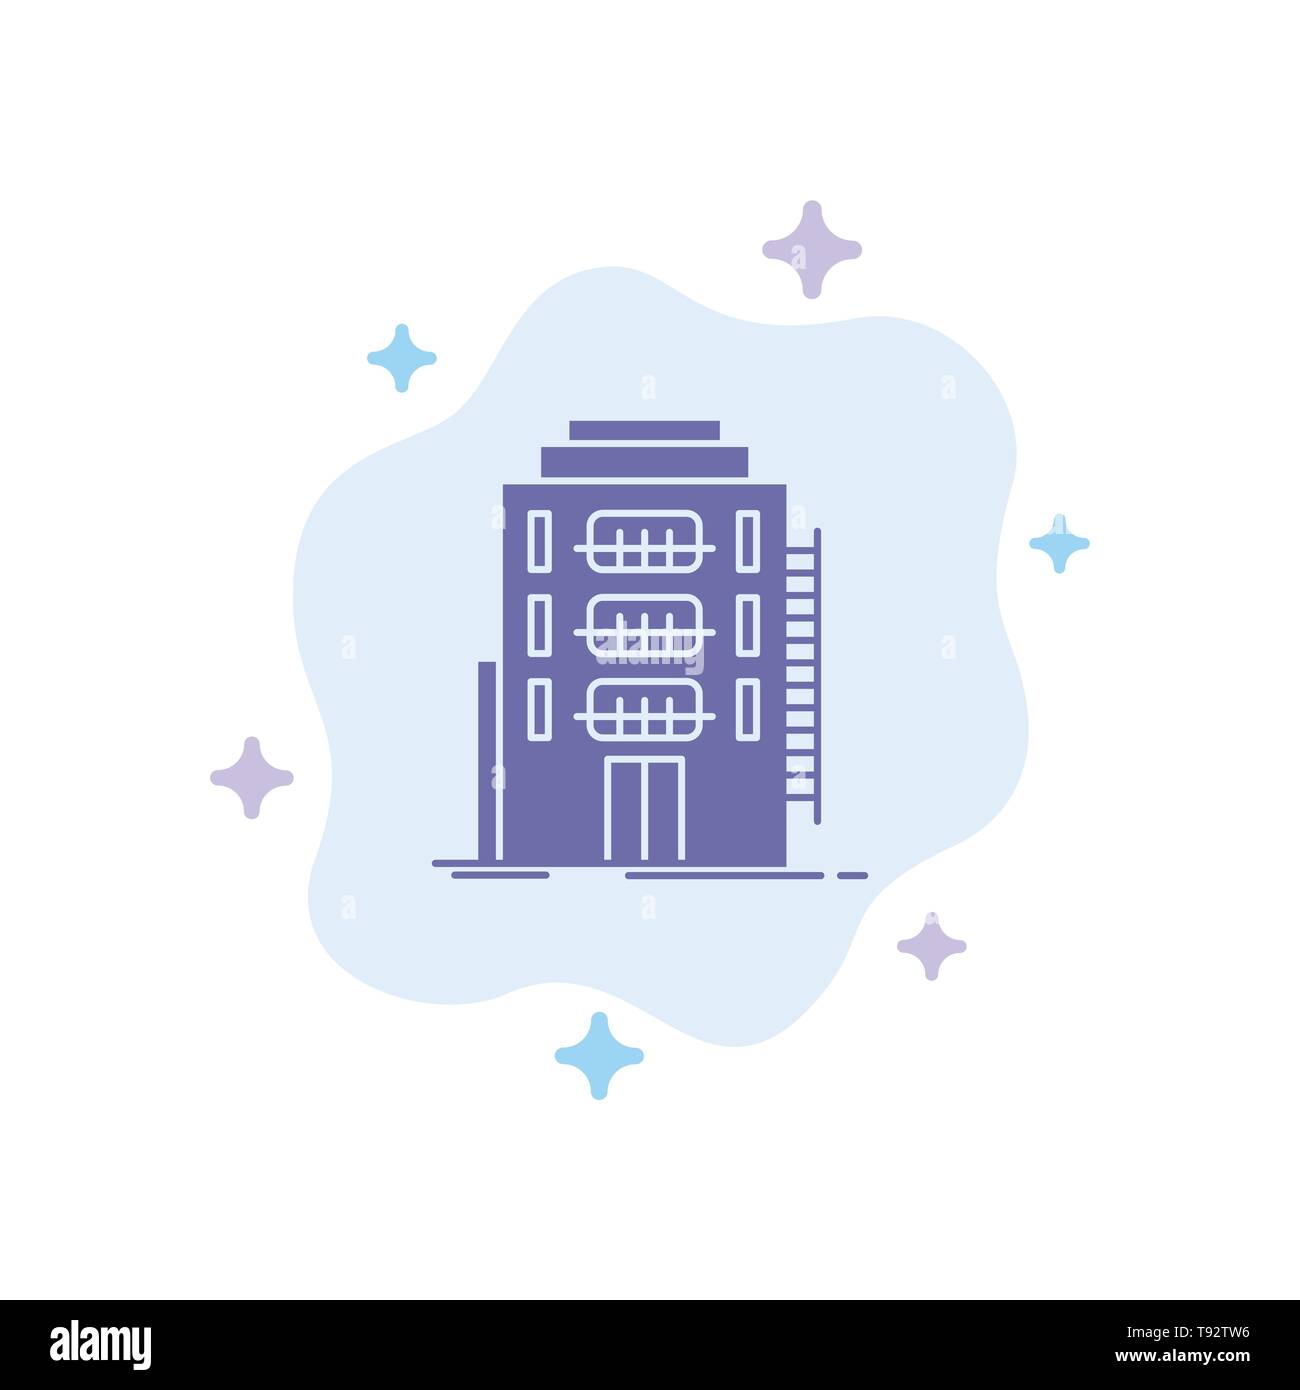 Building, City, Dormitory, Hostel, Hotel Blue Icon on Abstract Cloud Background Stock Vector